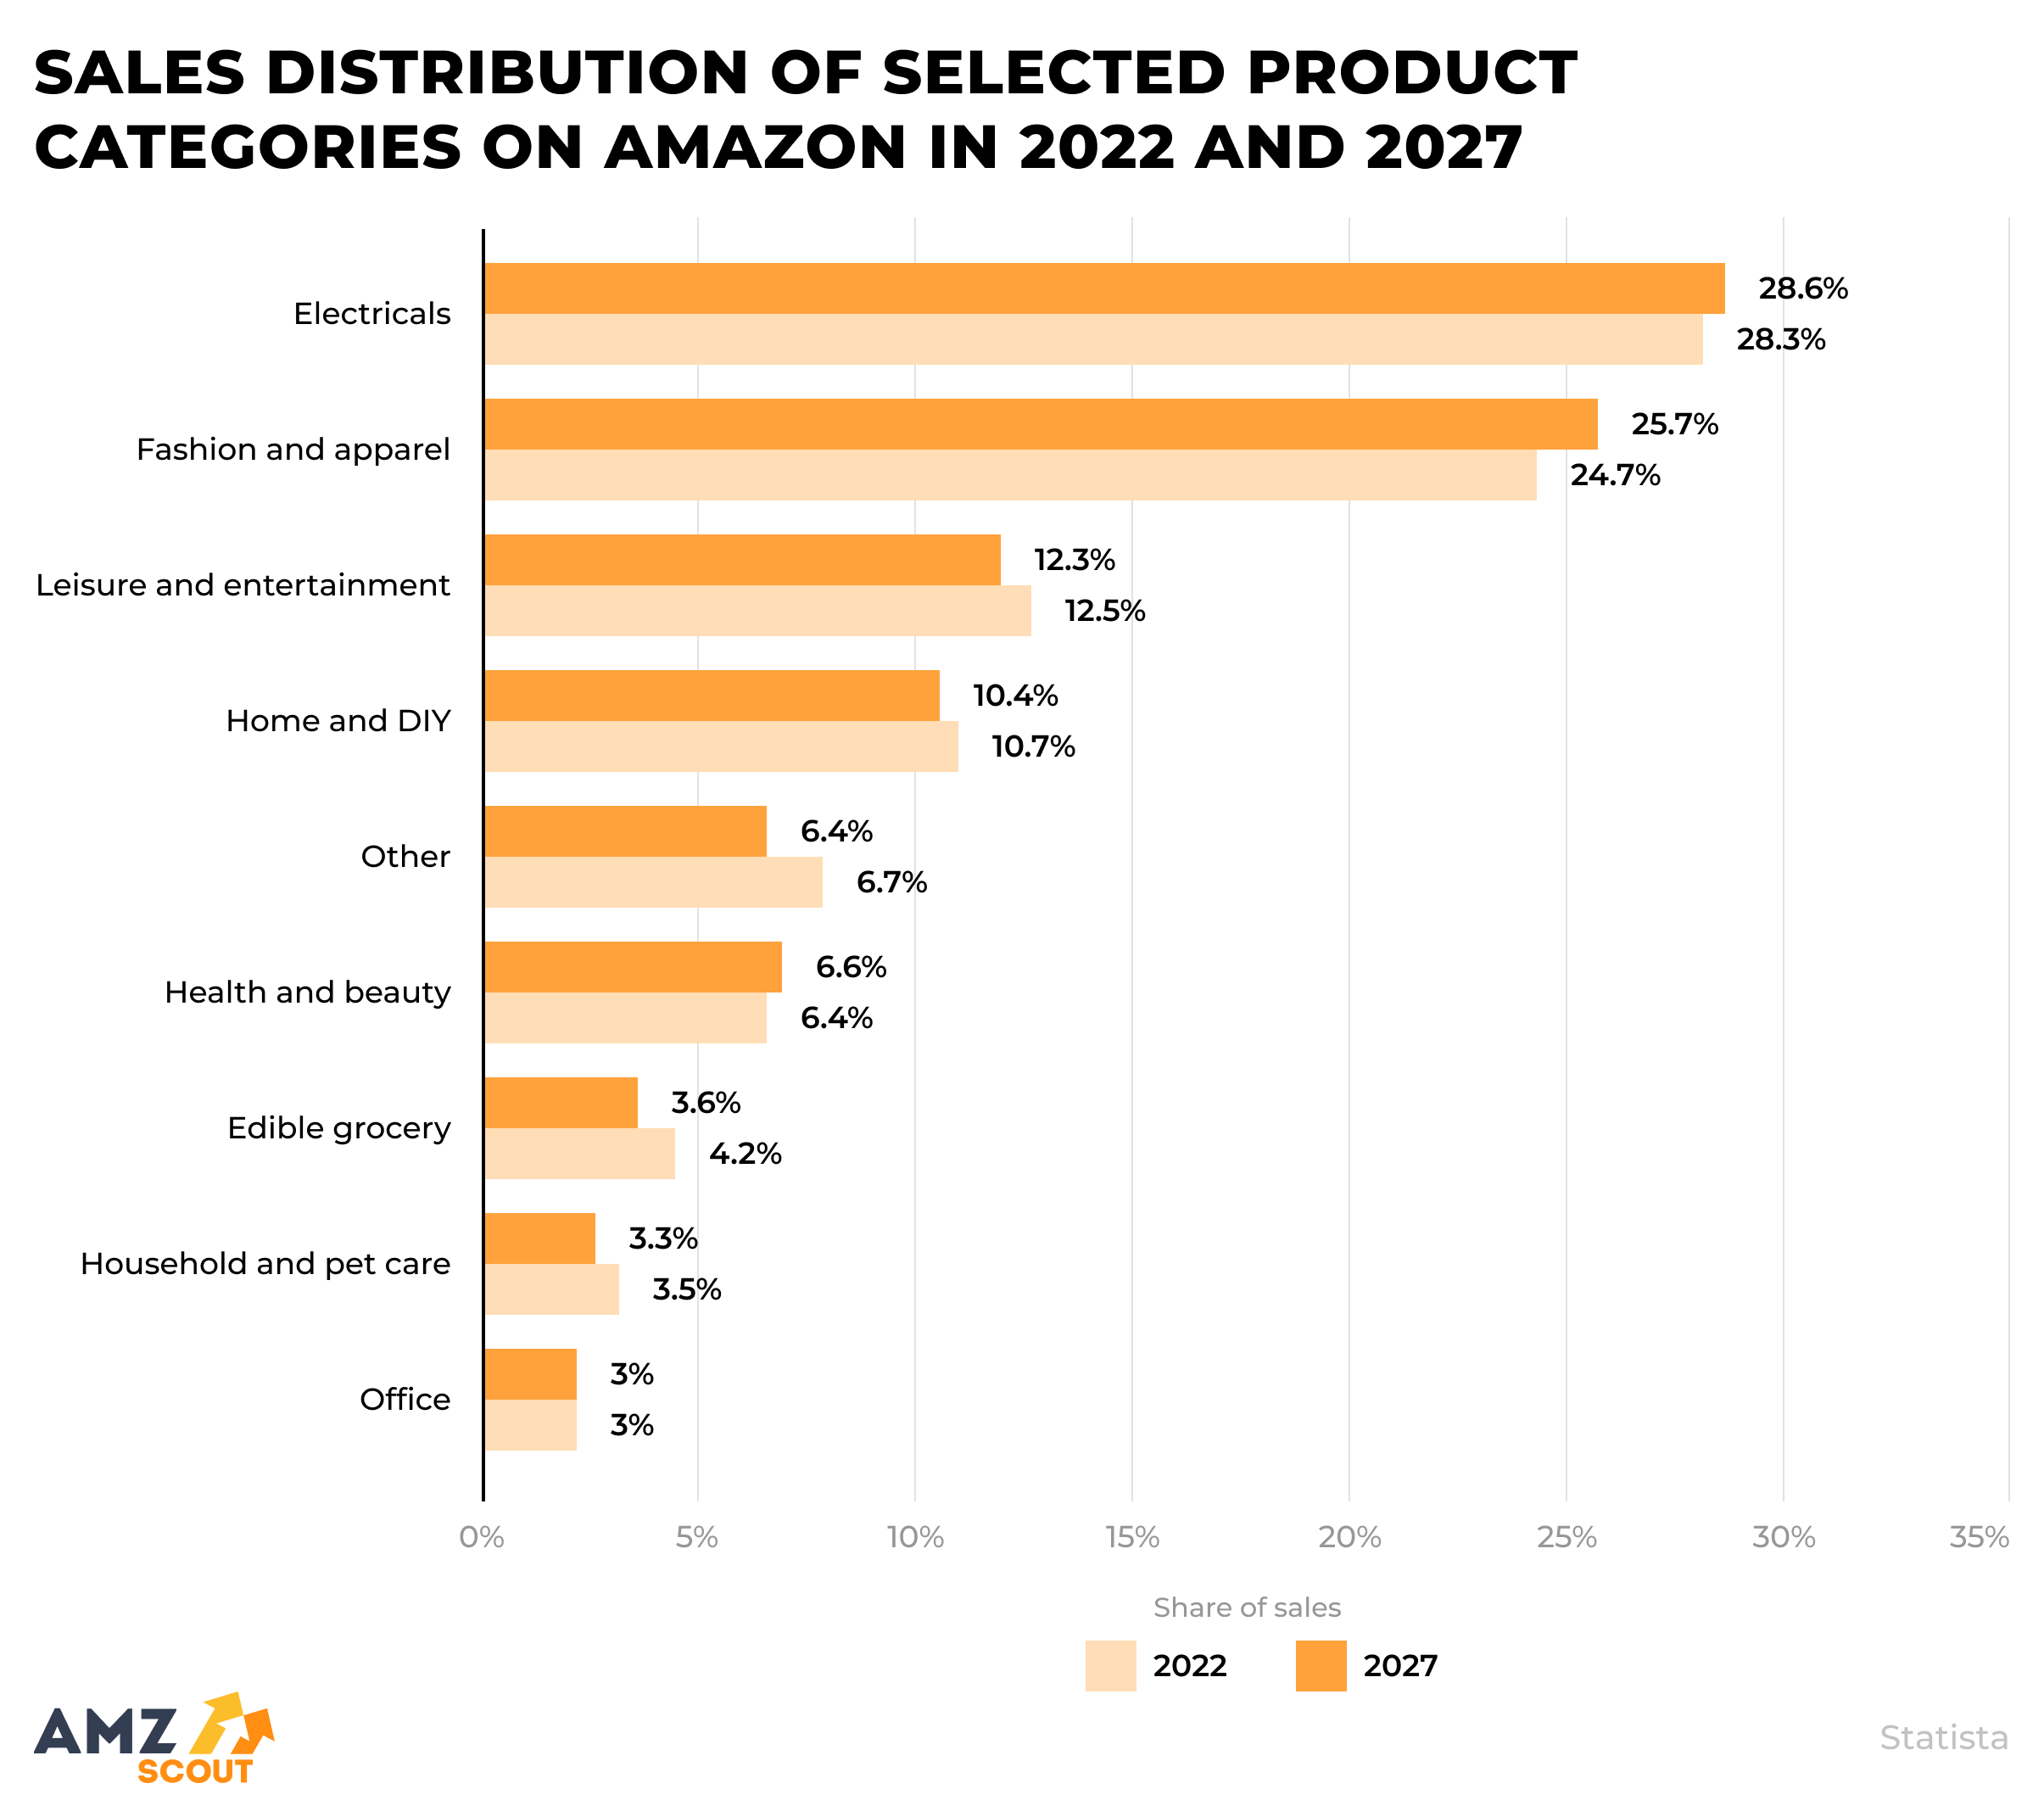 The most popular categories for online shopping on Amazon include Electronics (with over 28% of Amazon buyers) and Clothing (at around 25%). Remarkably, during the July Prime Day event, products from a Home Goods category were purchased by an impressive 40% of Amazon users.